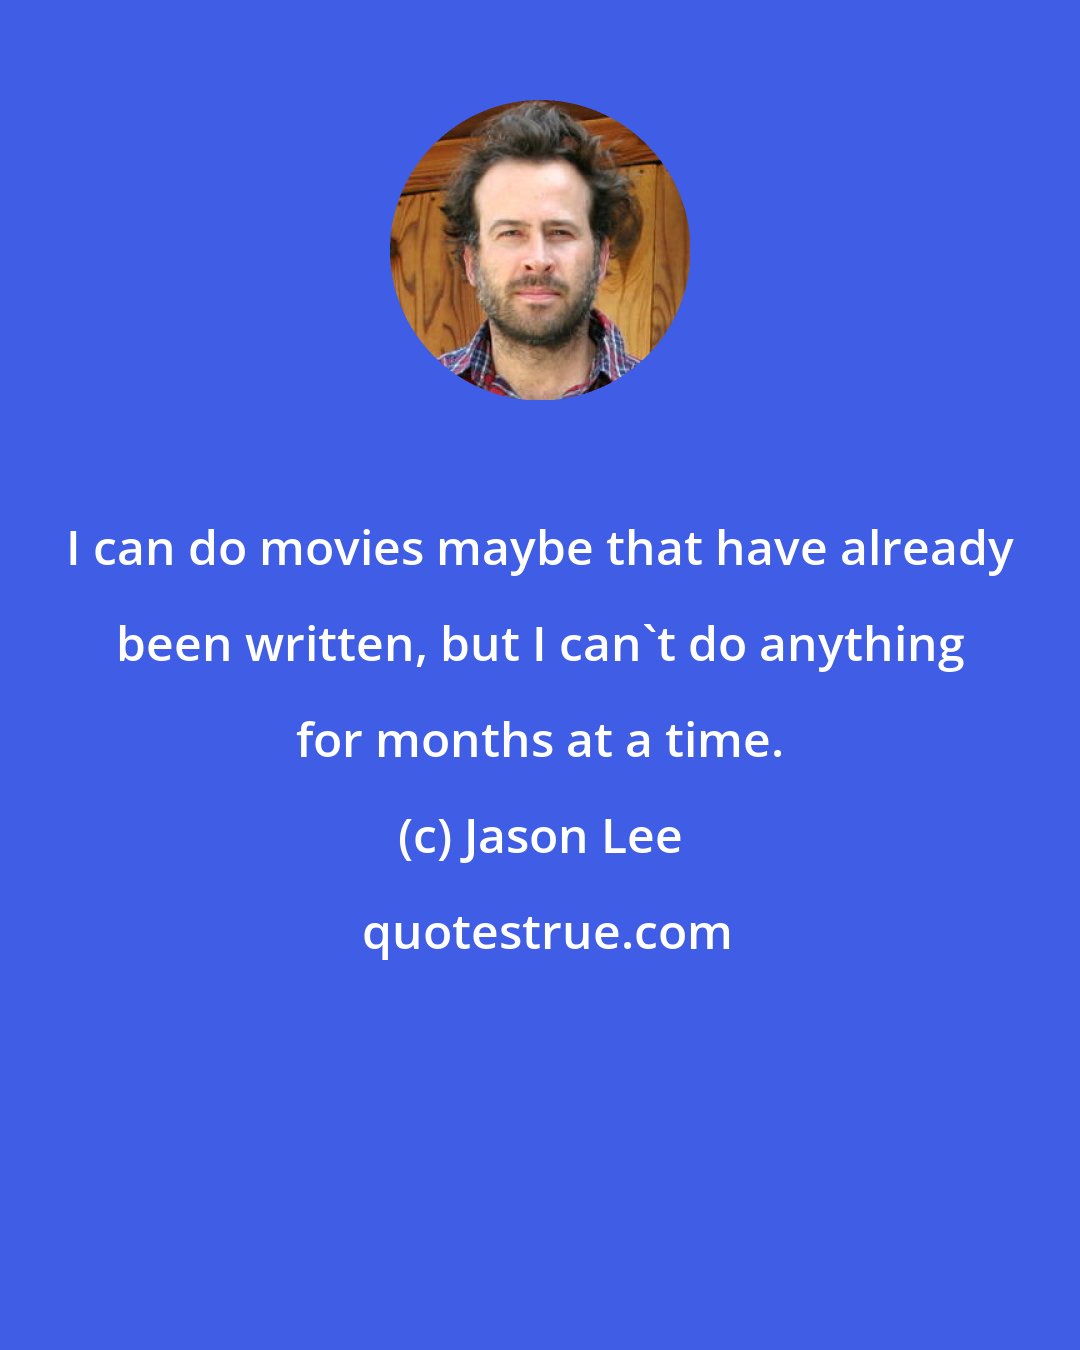 Jason Lee: I can do movies maybe that have already been written, but I can't do anything for months at a time.